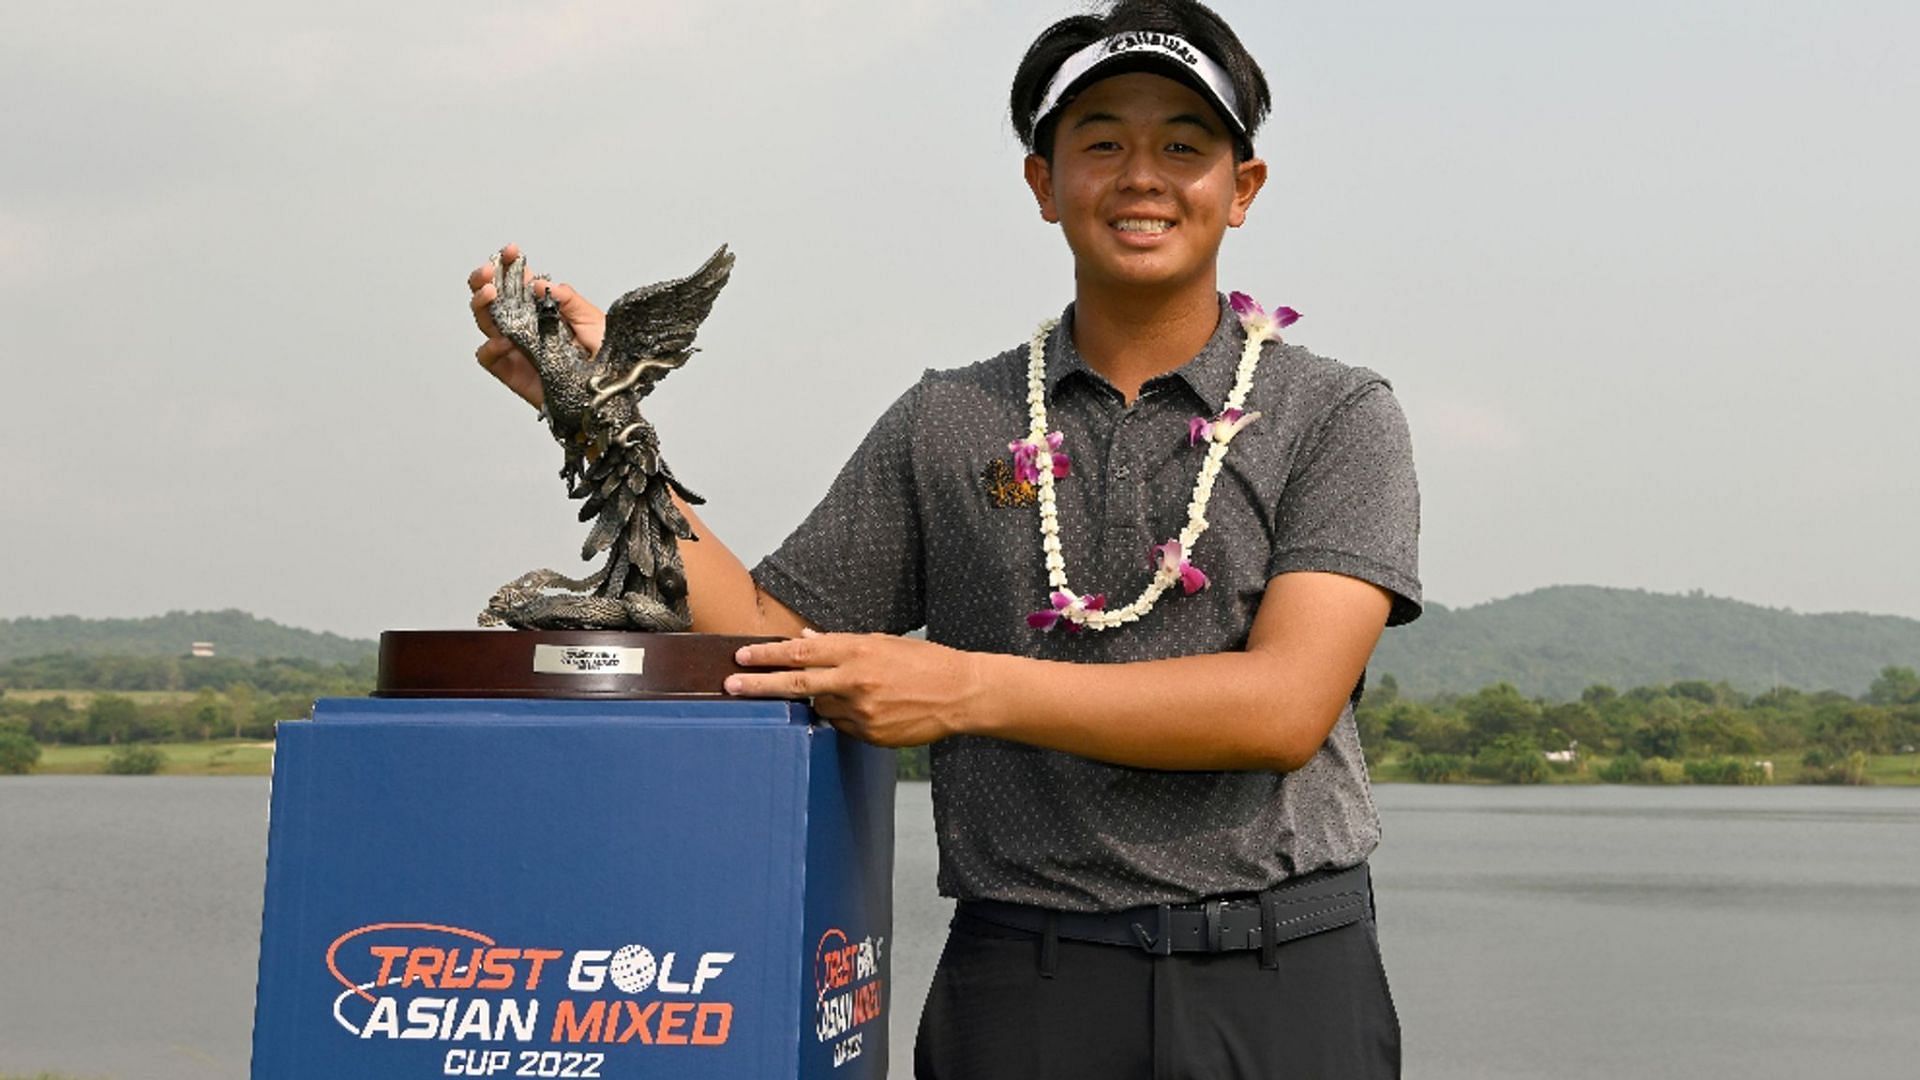 Ratchanon Chantananuwat won the Trust Golf Asian Mixed Cup last year to become the youngest amateur to win OWGR event